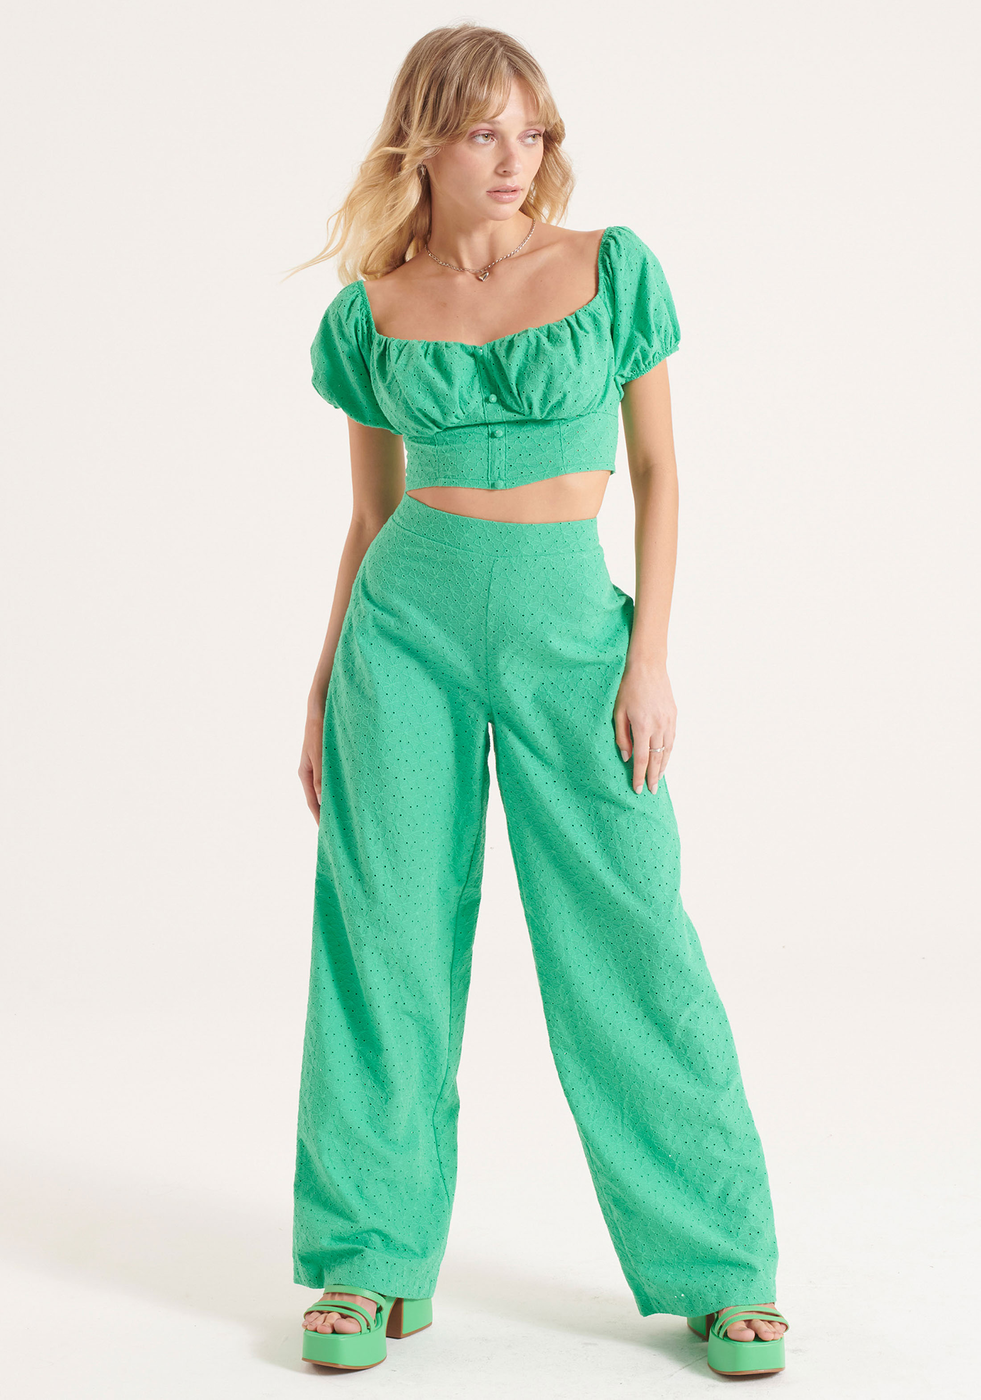 Blusa Verde My Favorite Things Cropped Ombro a Ombro | ZZ MALL